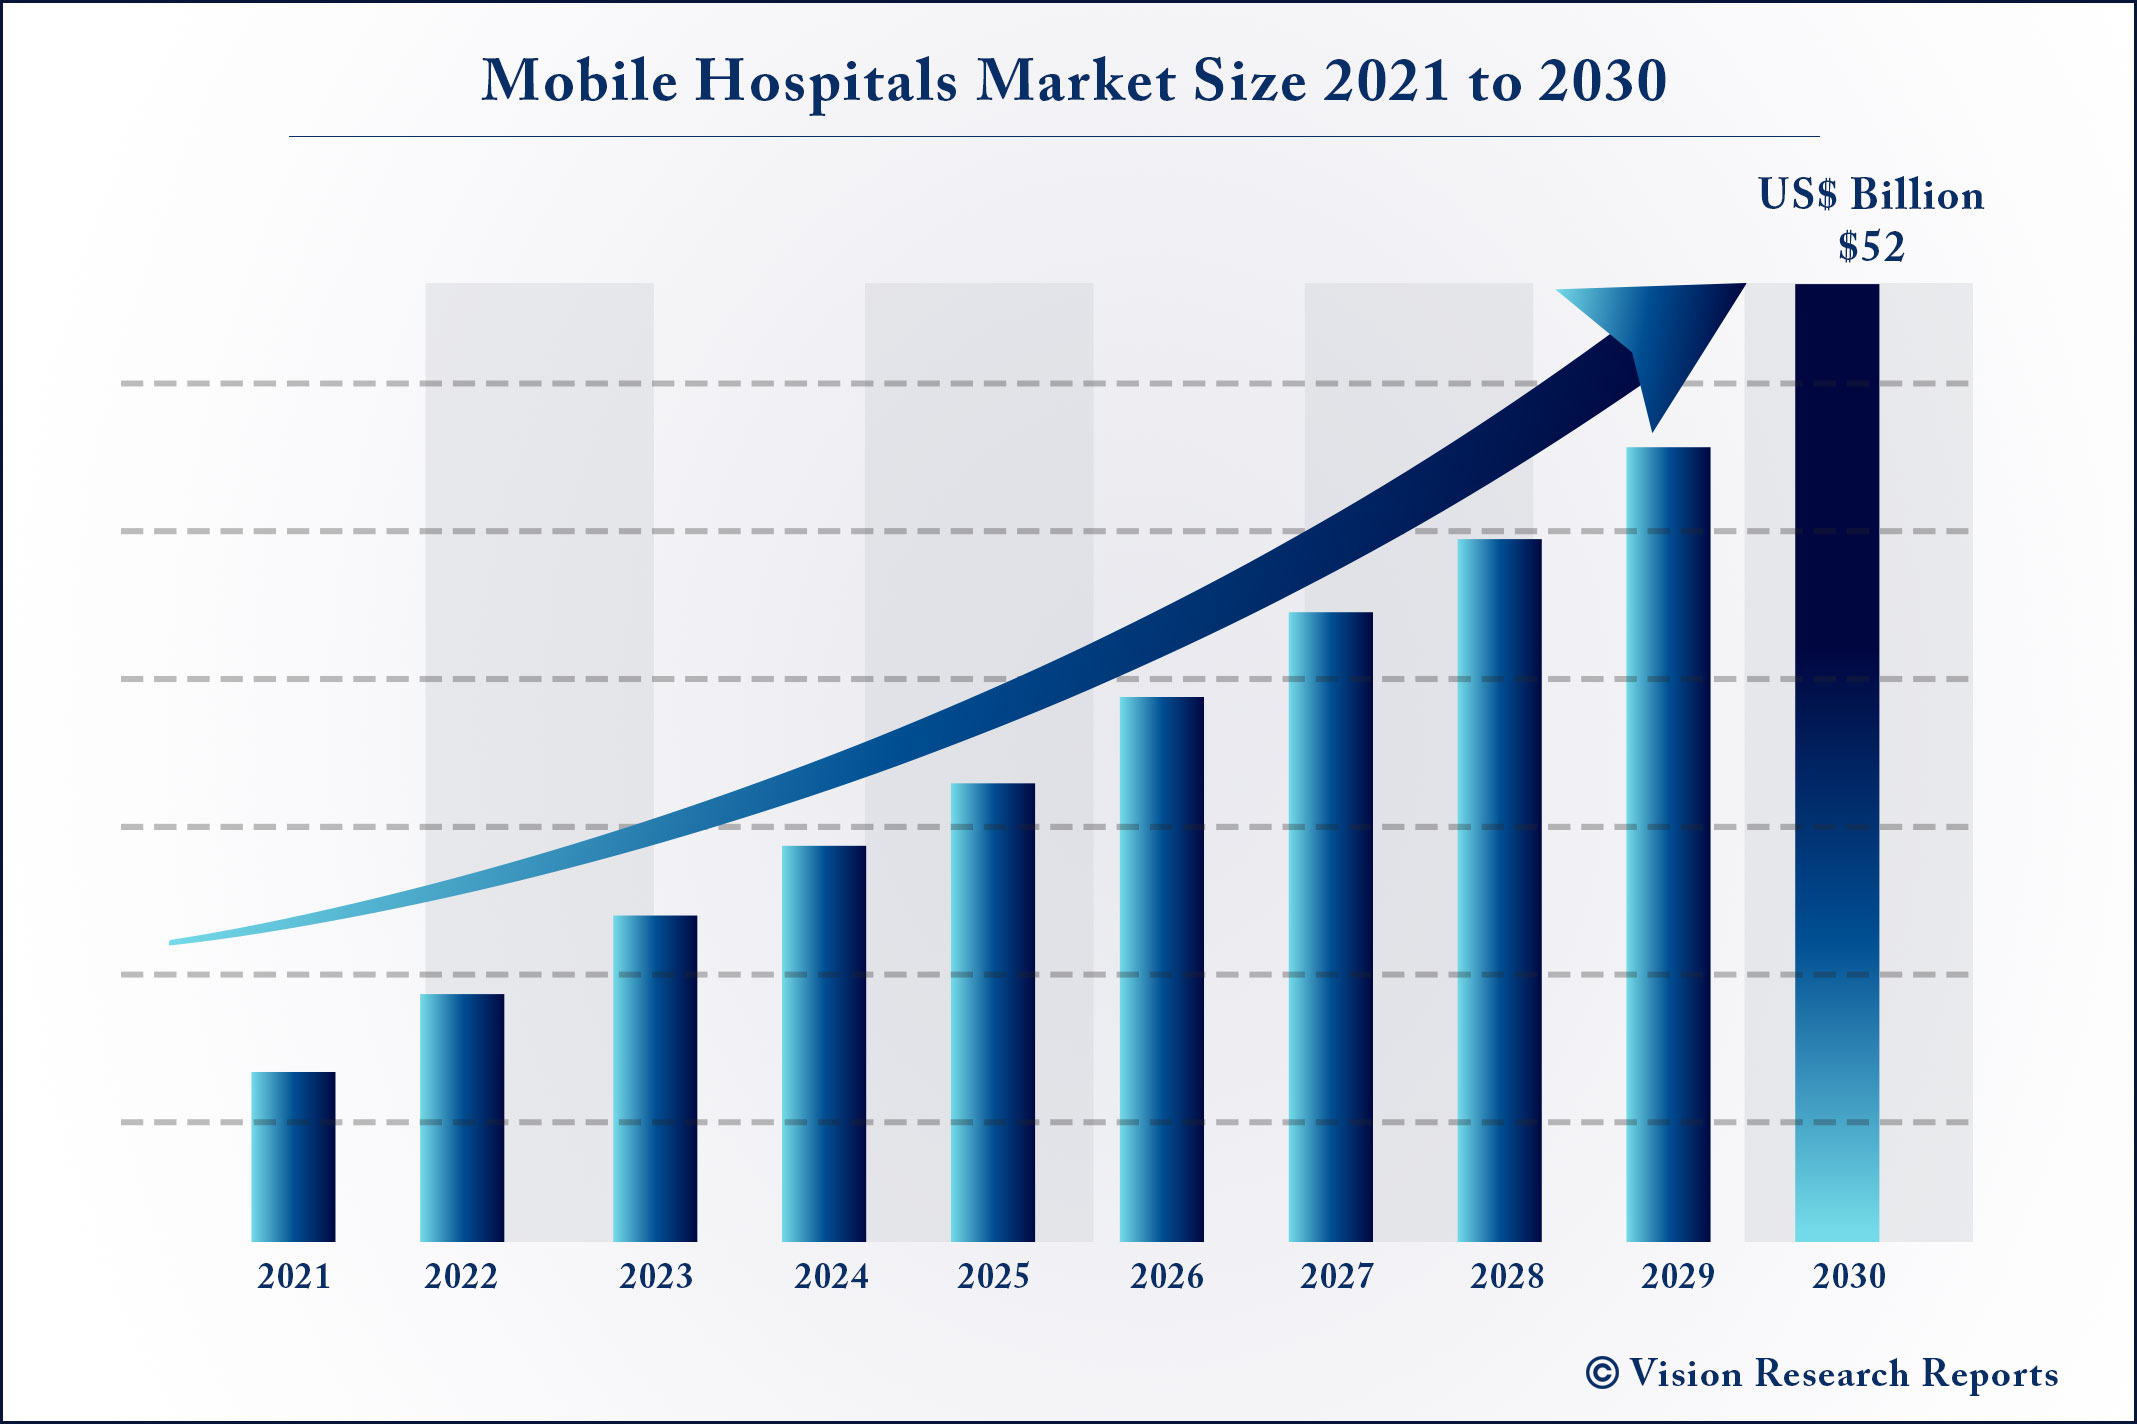 Mobile Hospitals Market Size 2021 to 2030